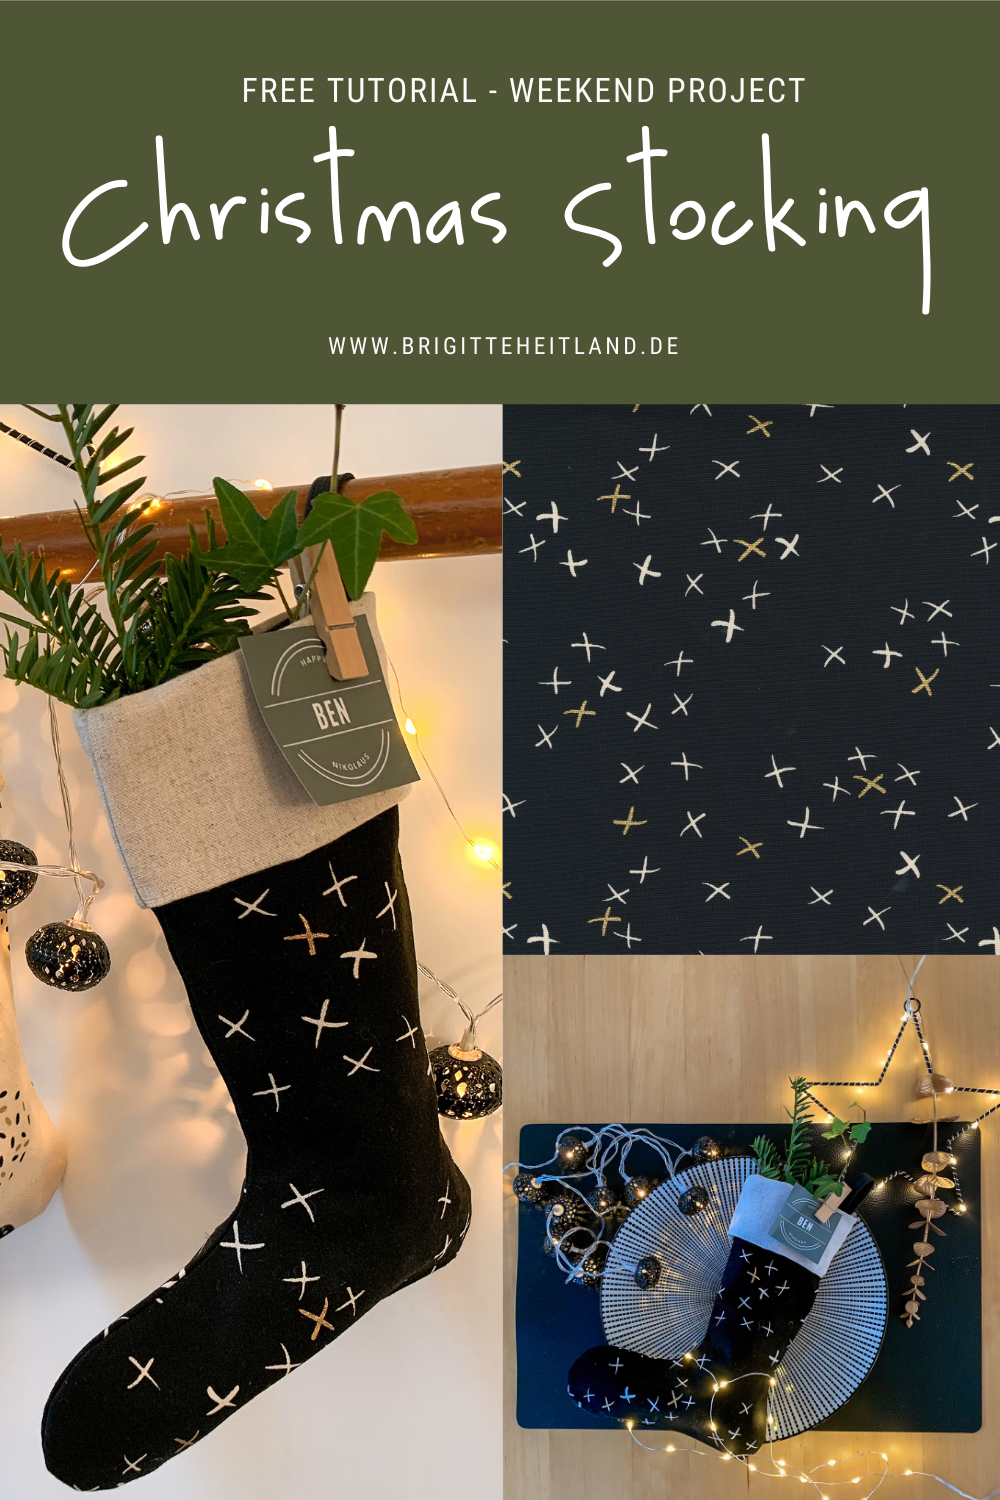 14 Ideas for How to Hang & Style Your Stockings (With or Without a